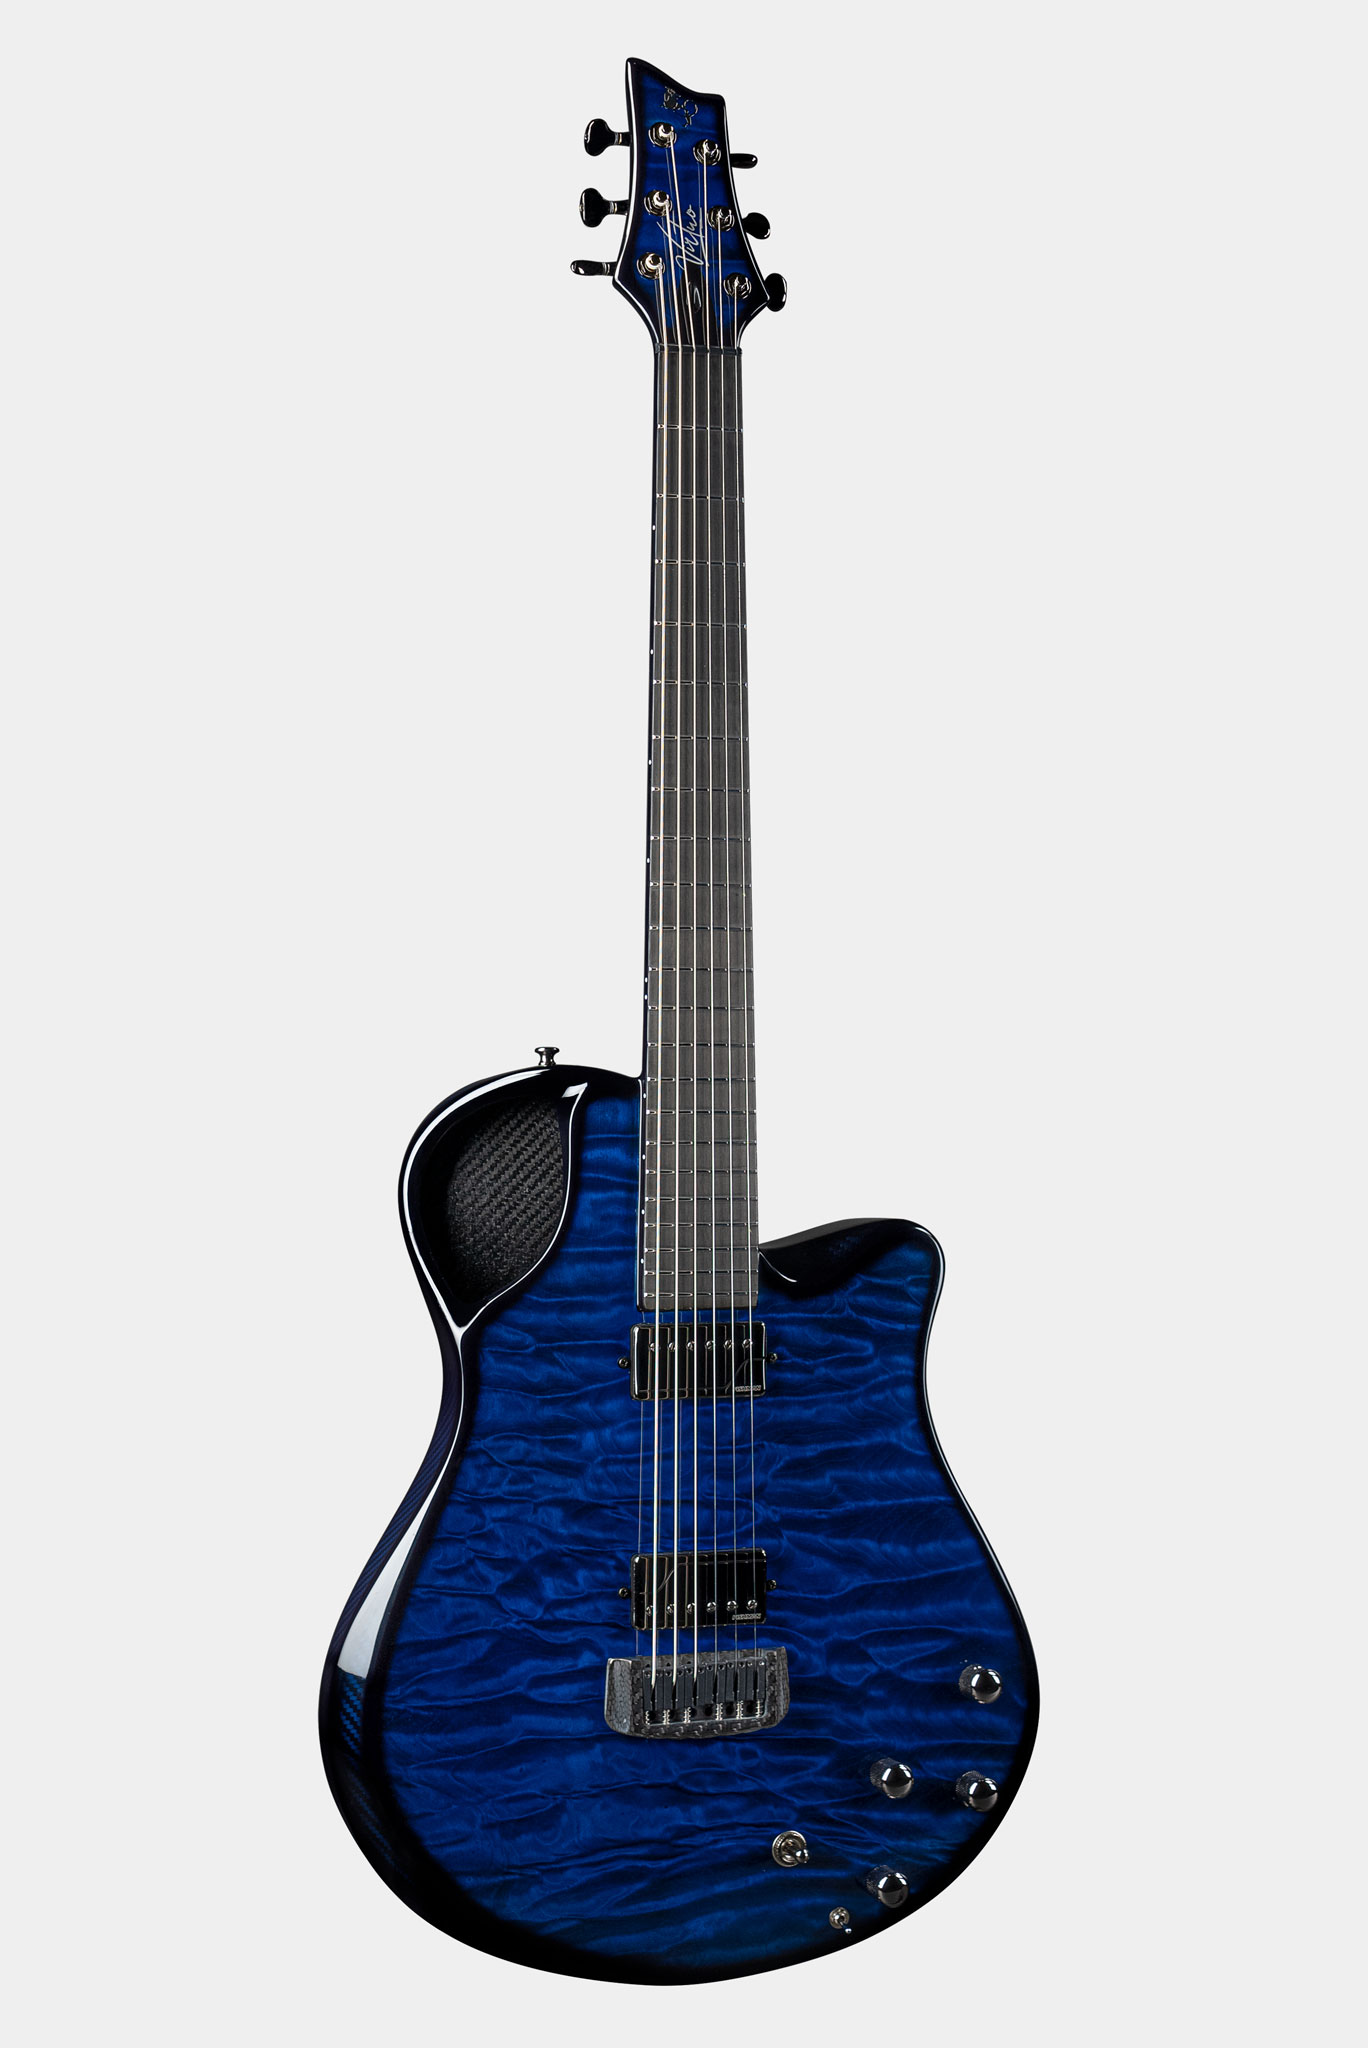 Emerald Guitars Virtuo model in Quilted Maple Blue